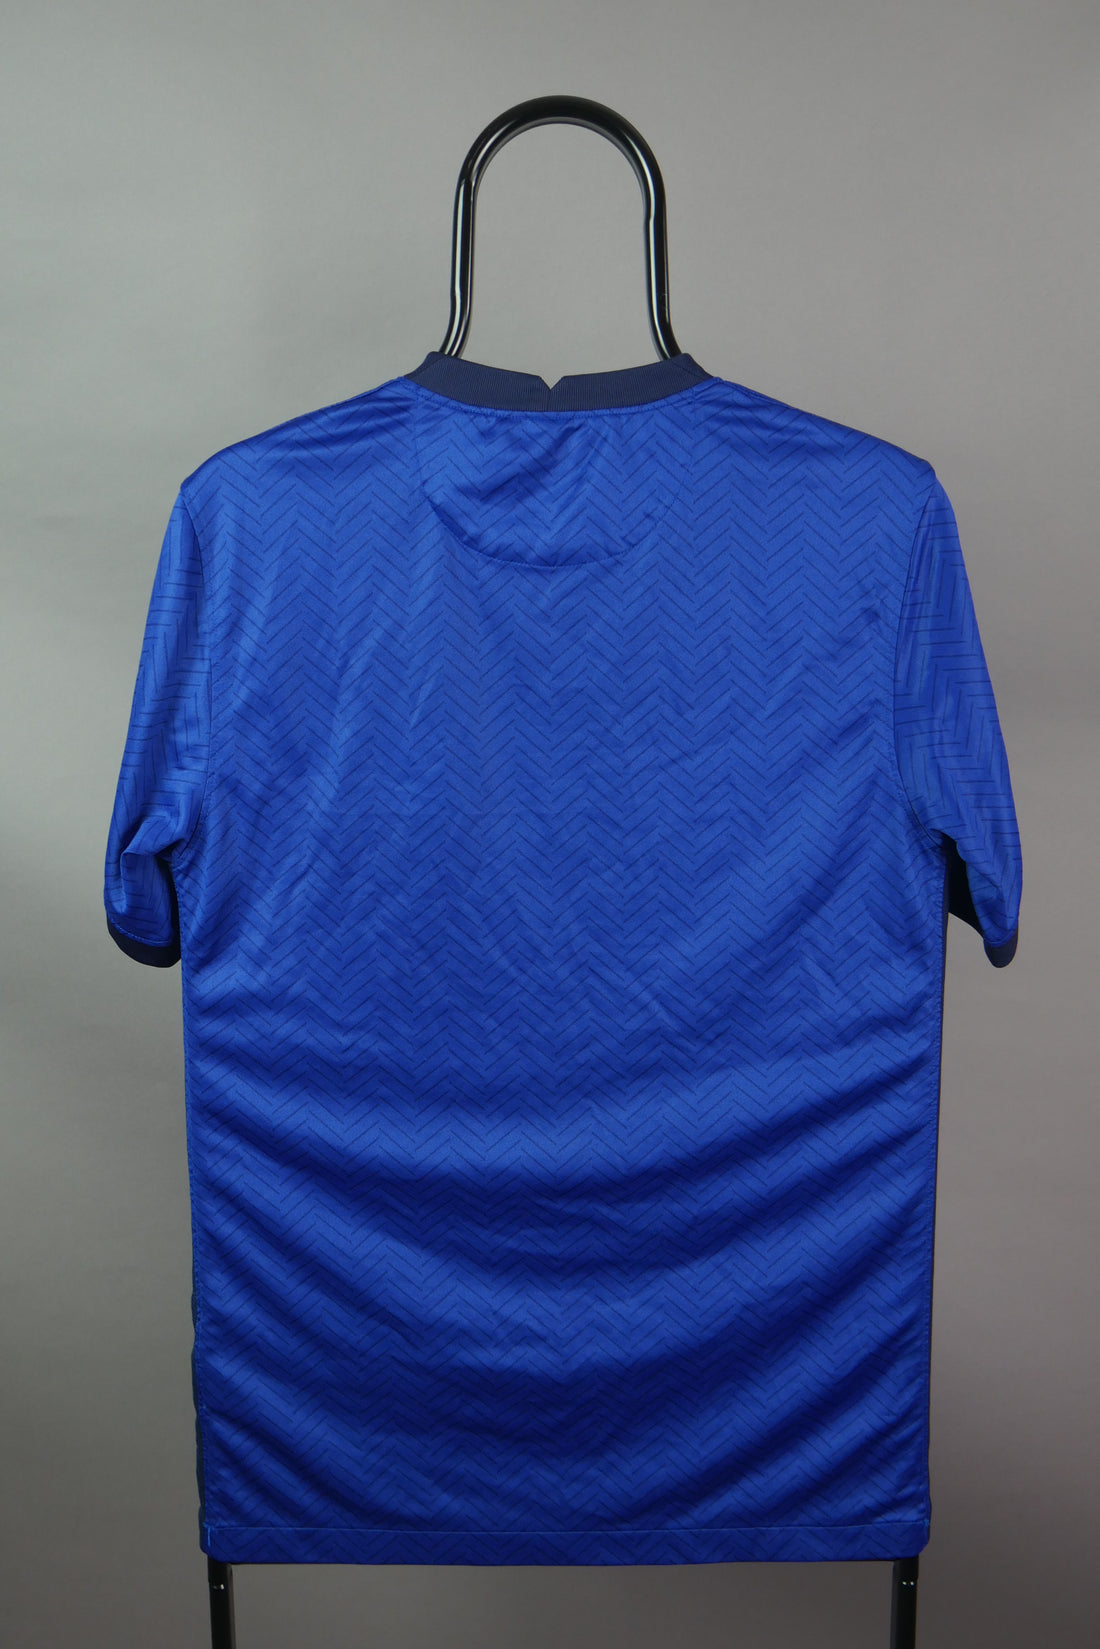 The Chelsea FC T-Shirt (S)